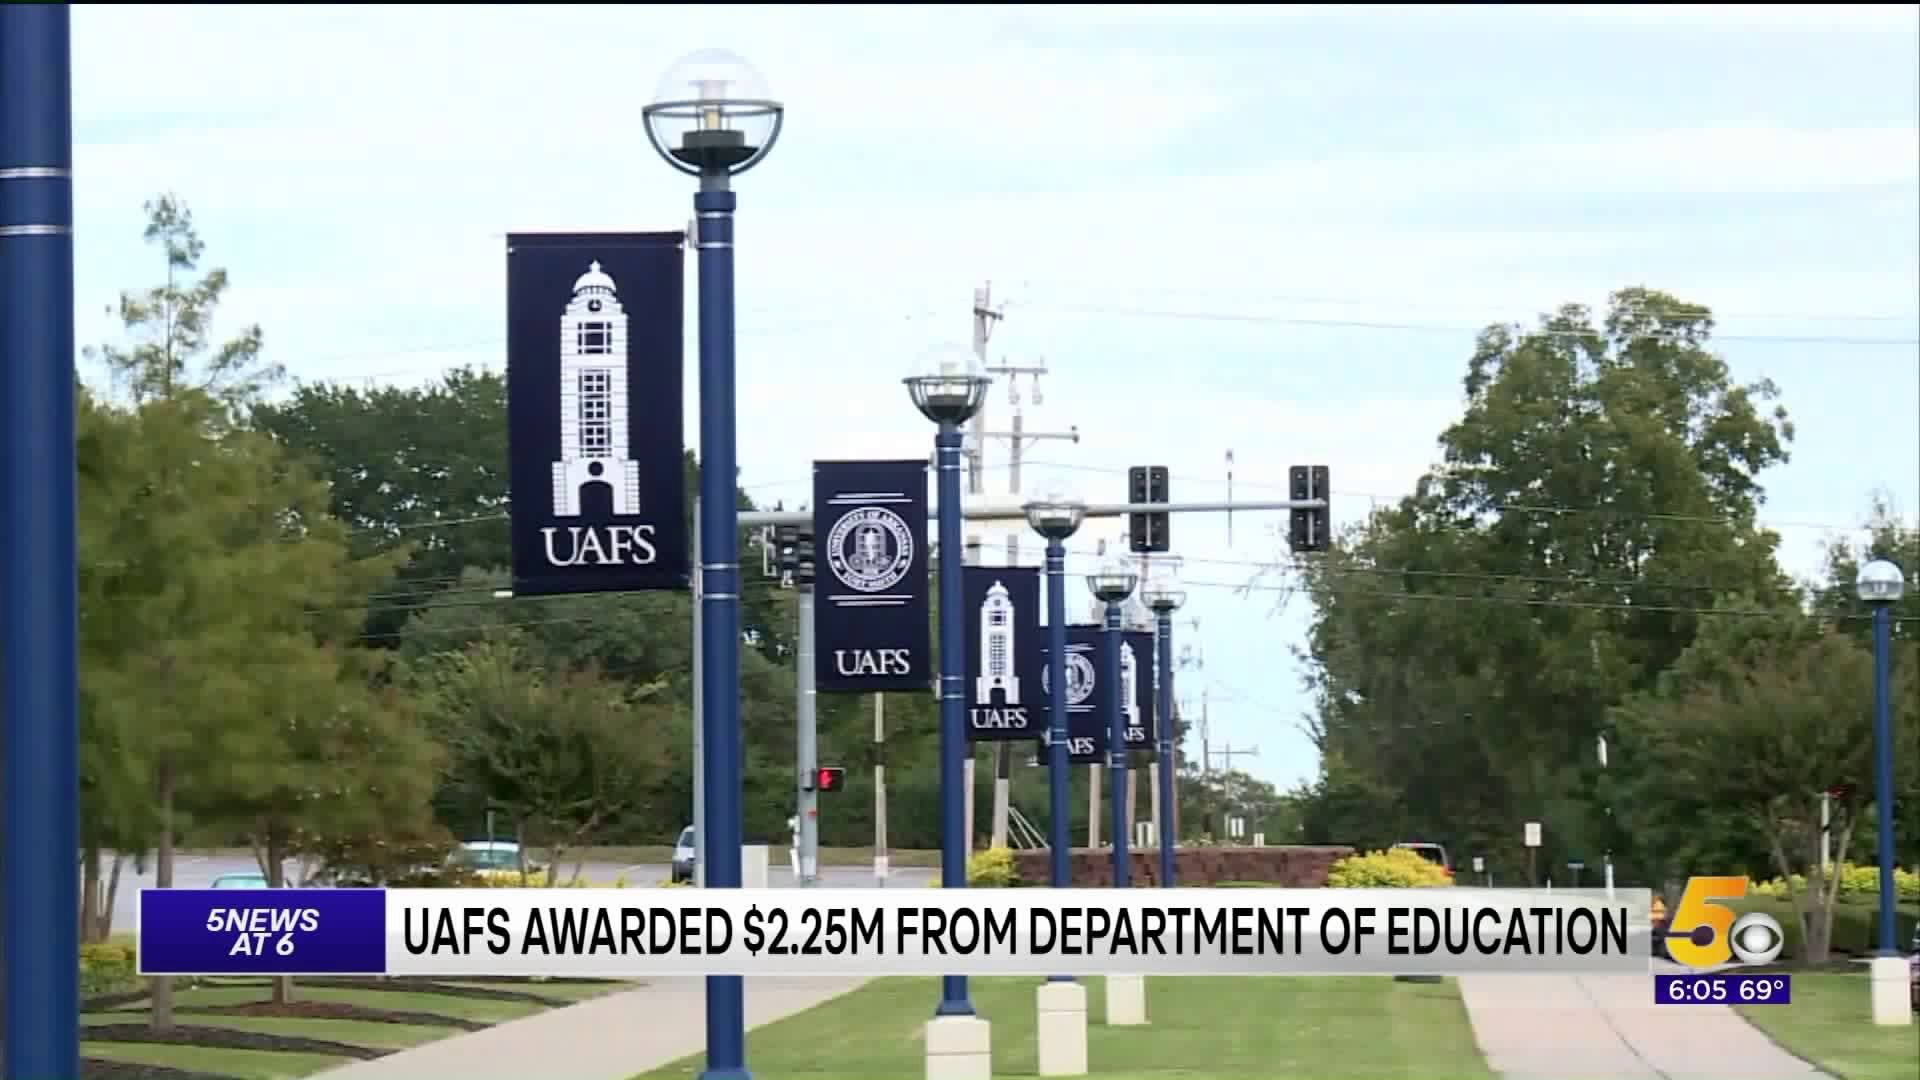 UAFS Awarded $2.25M From Department Of Education